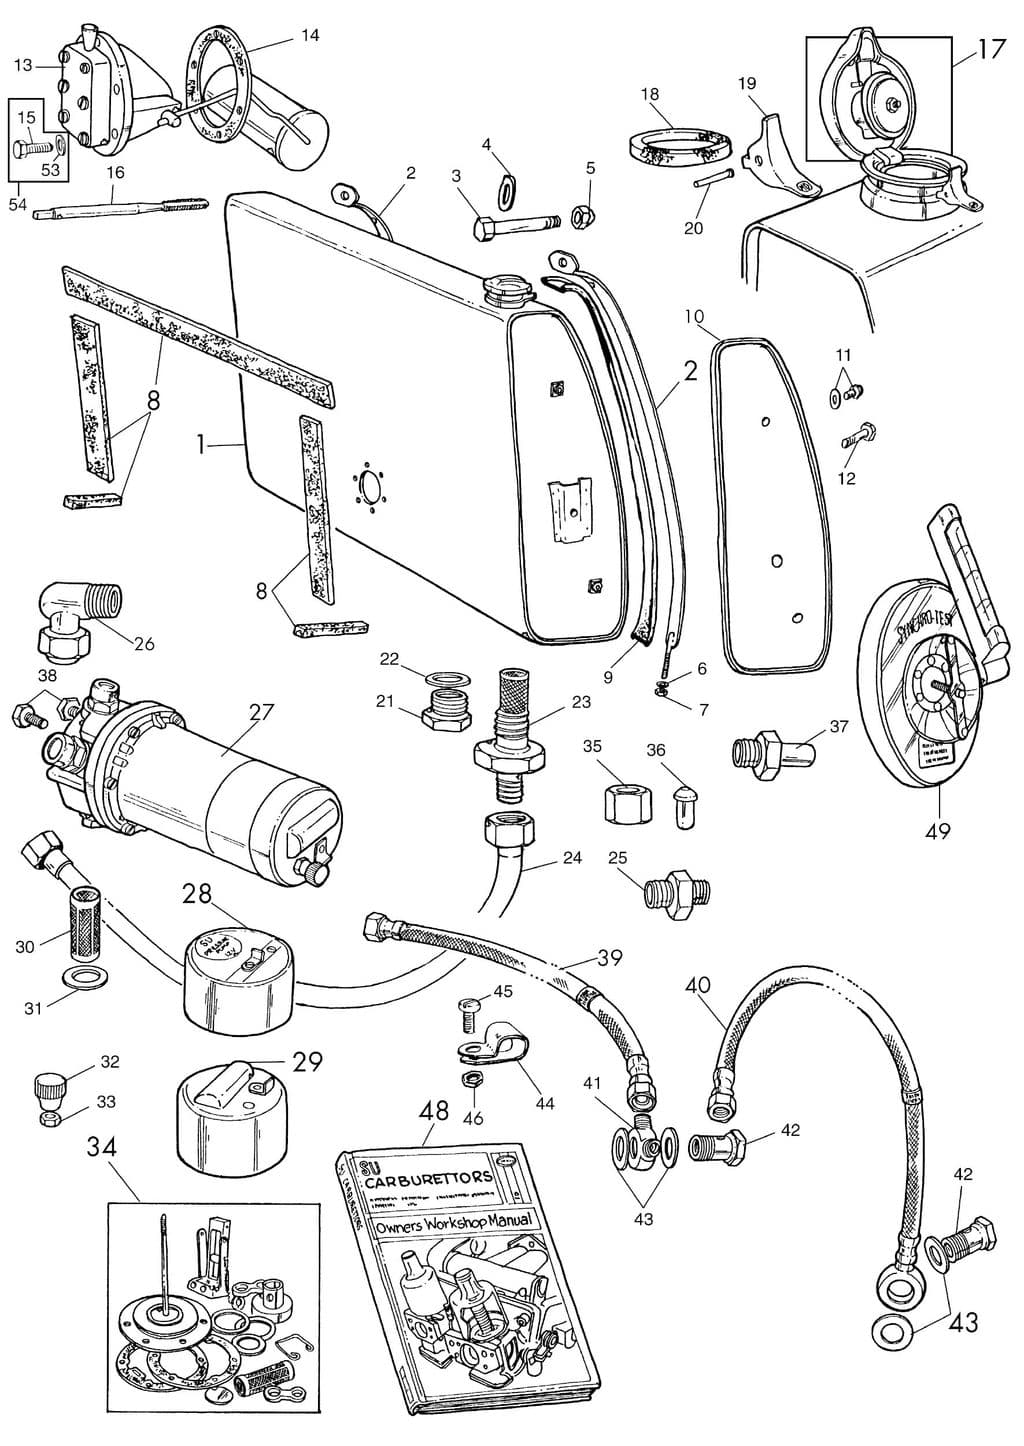 MGTC 1945-1949 - Fuel sending units | Webshop Anglo Parts - Fuel system - 1